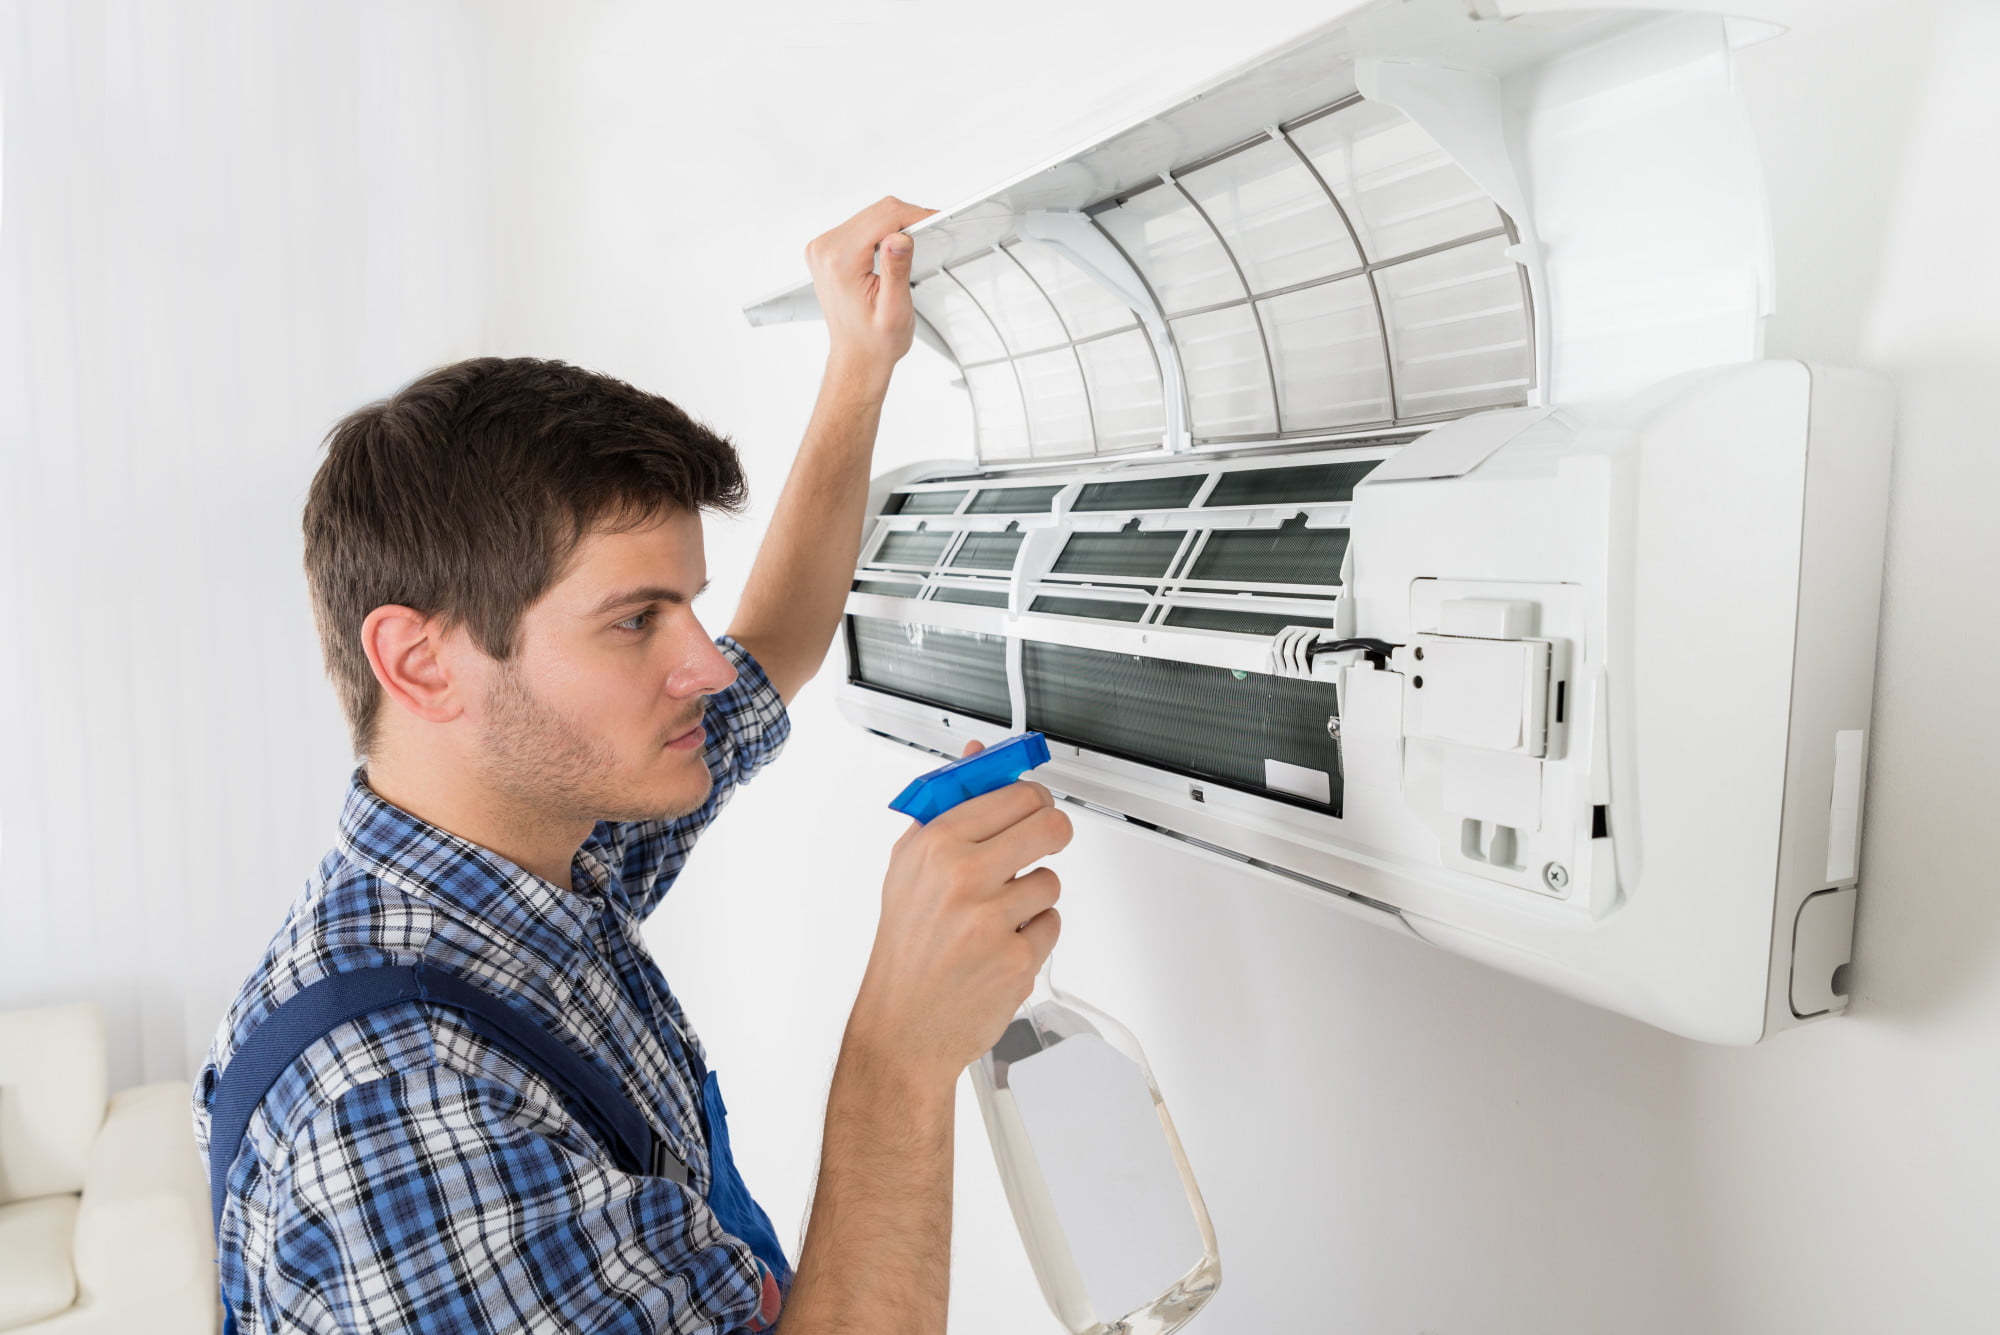 As a homeowner, it is important to know how to take care of your air conditioner. Here are 5 AC maintenance tips to keep your system running smoothly.